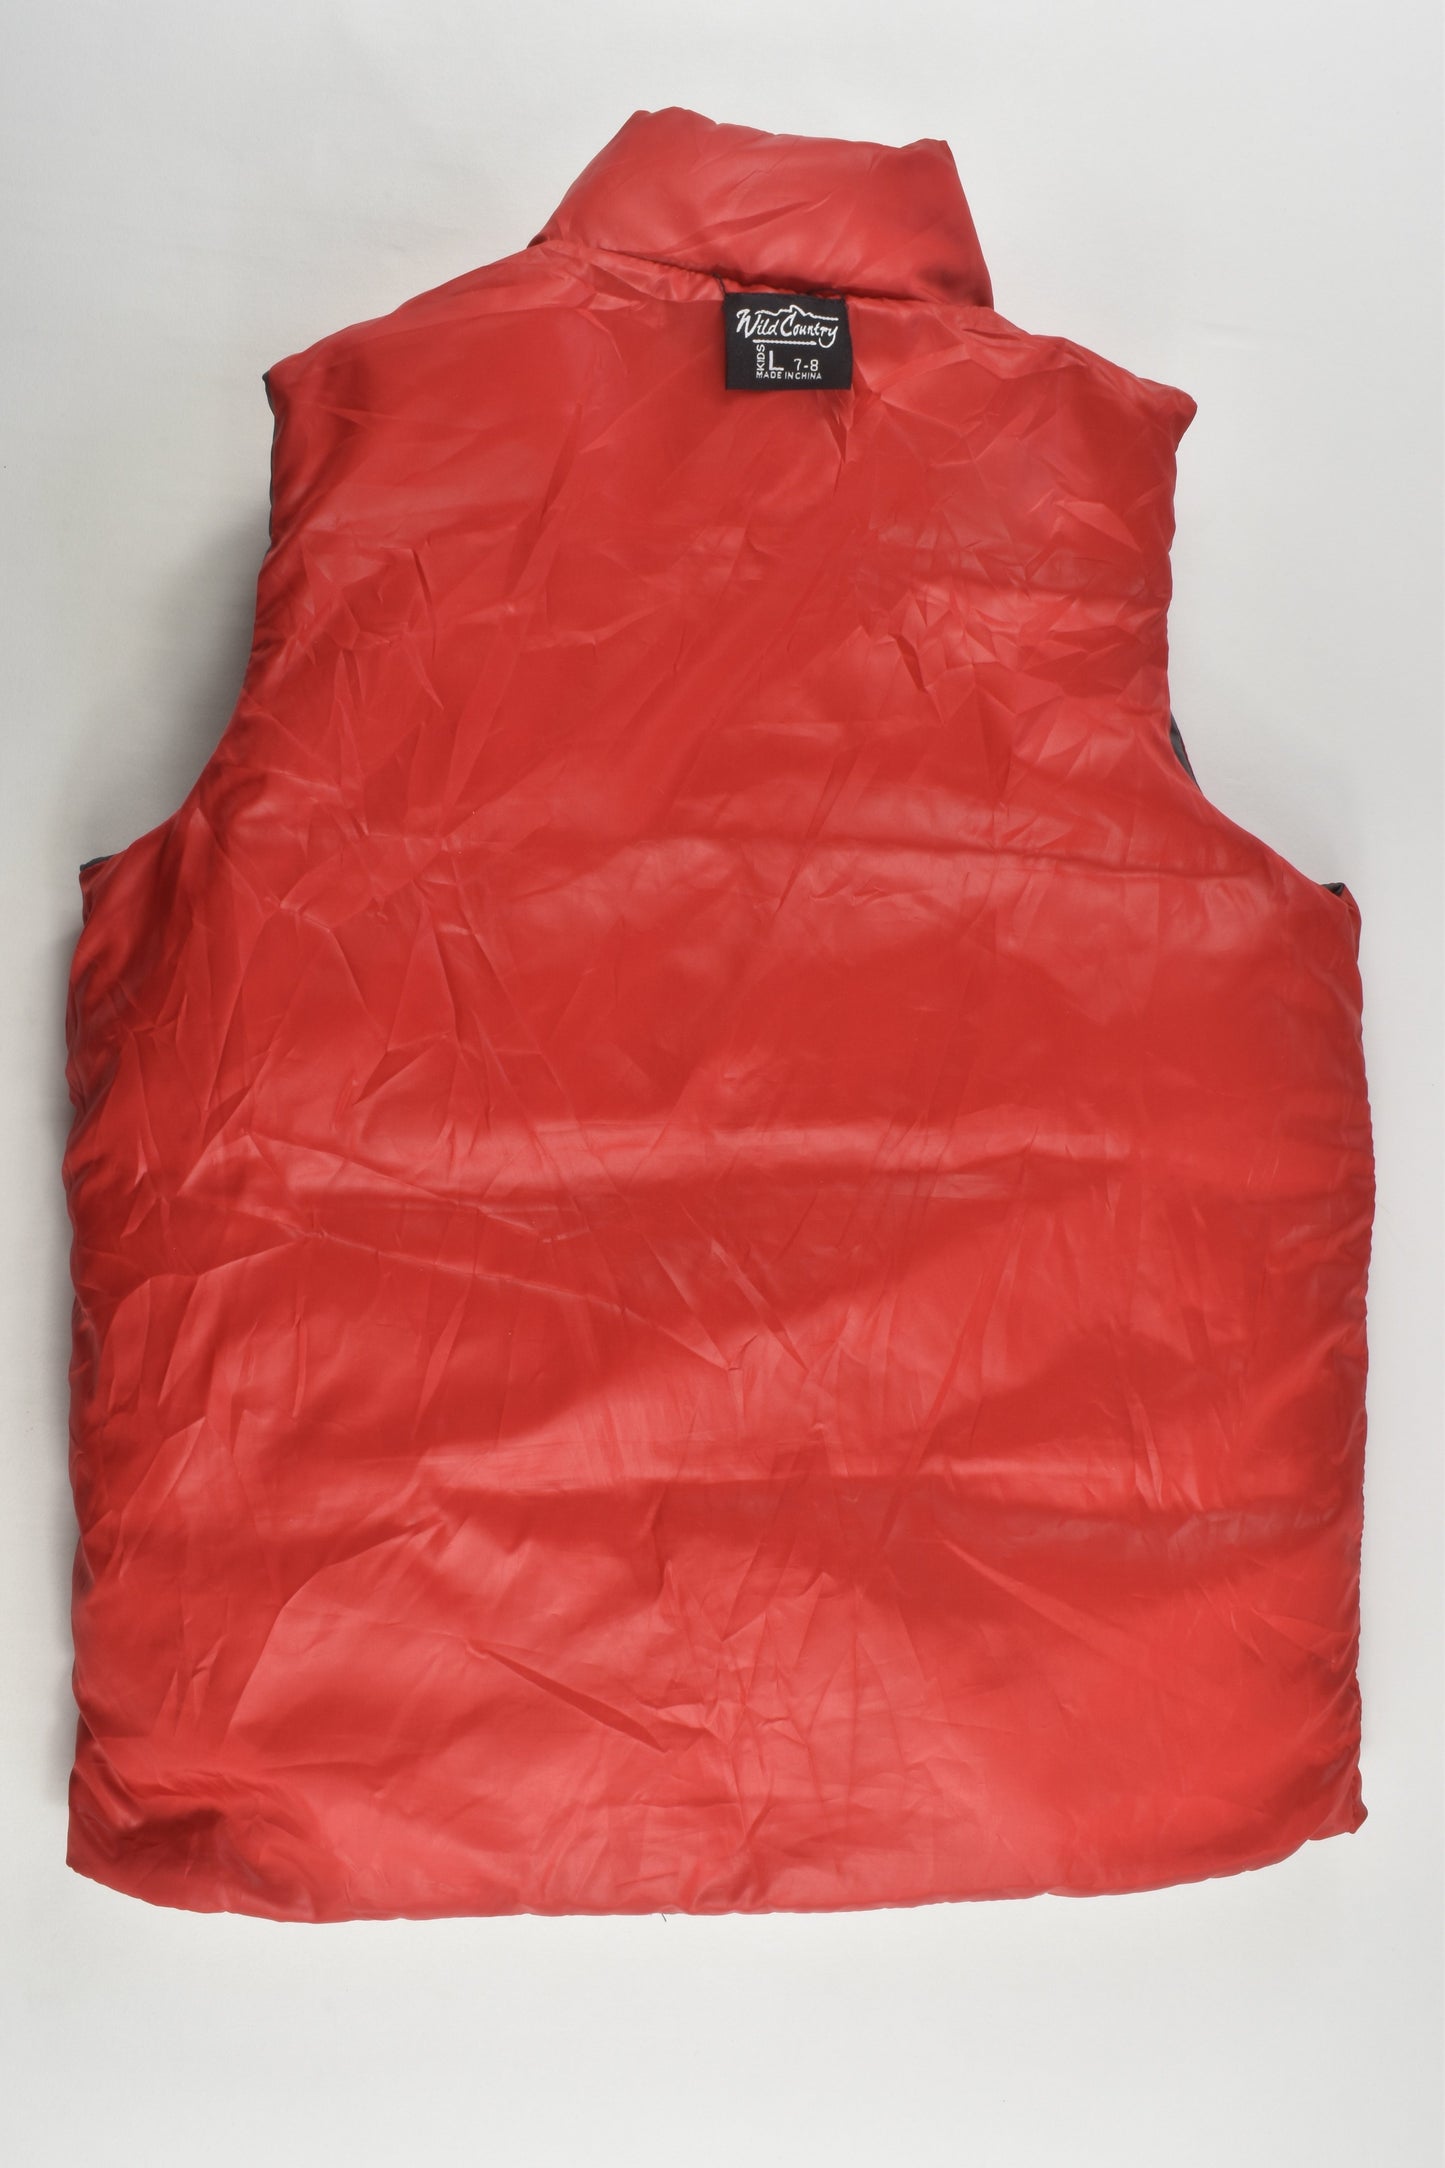 Wild Country Size 7-8 Reversible Puffer Vest